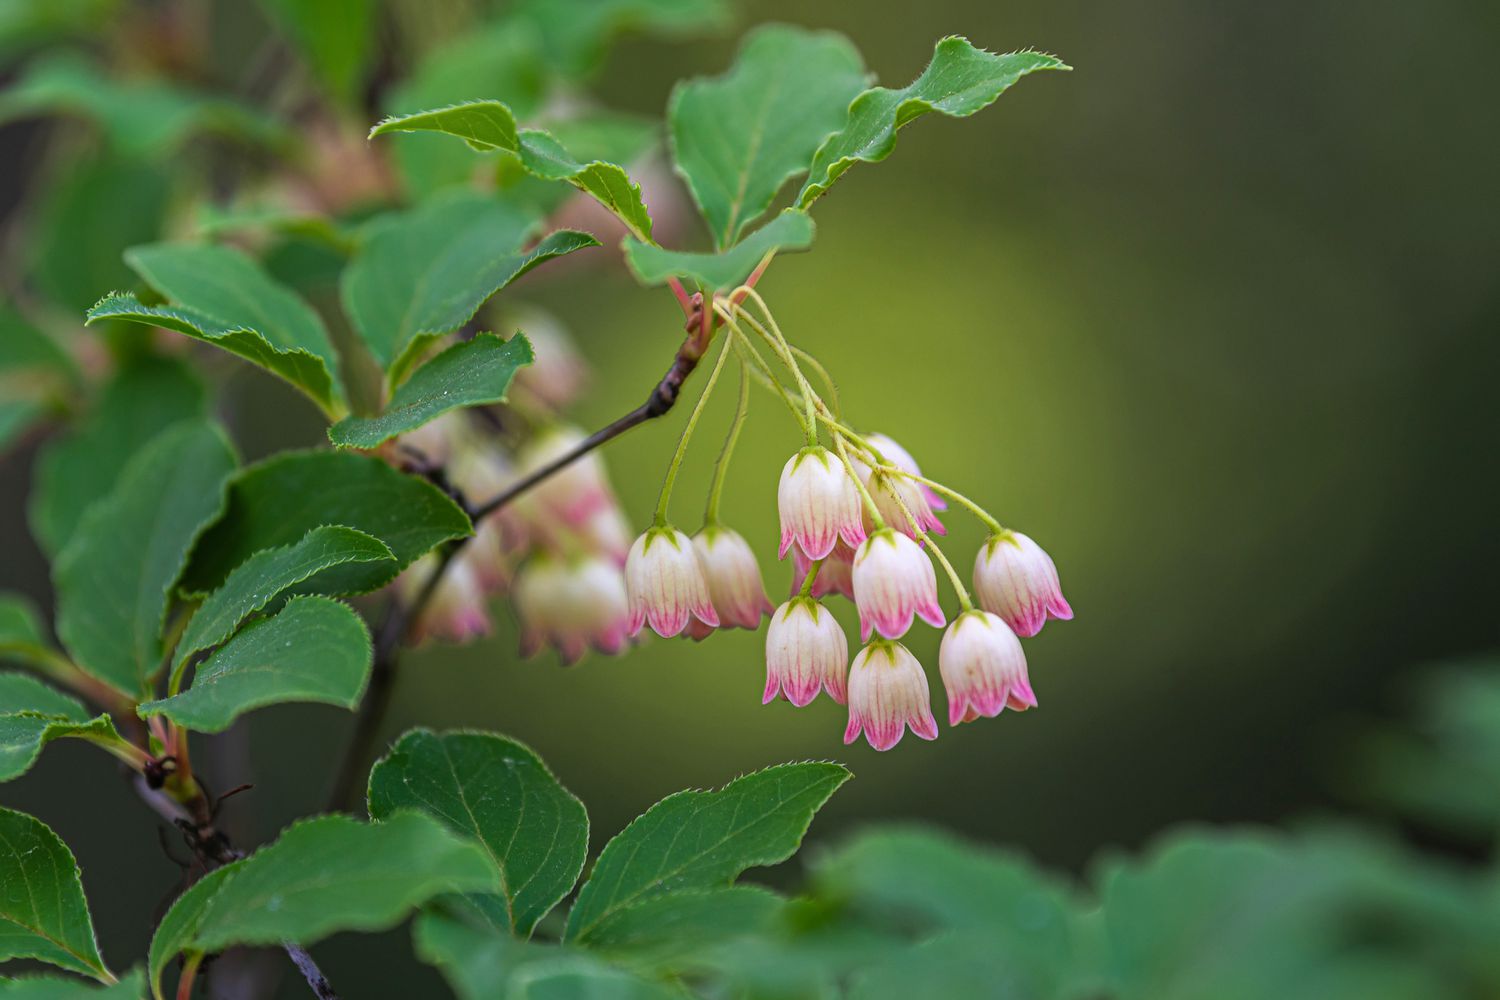 Red vein enkianthus shrub branch with small white bell-shaped flowers with pink veins and tips closeup